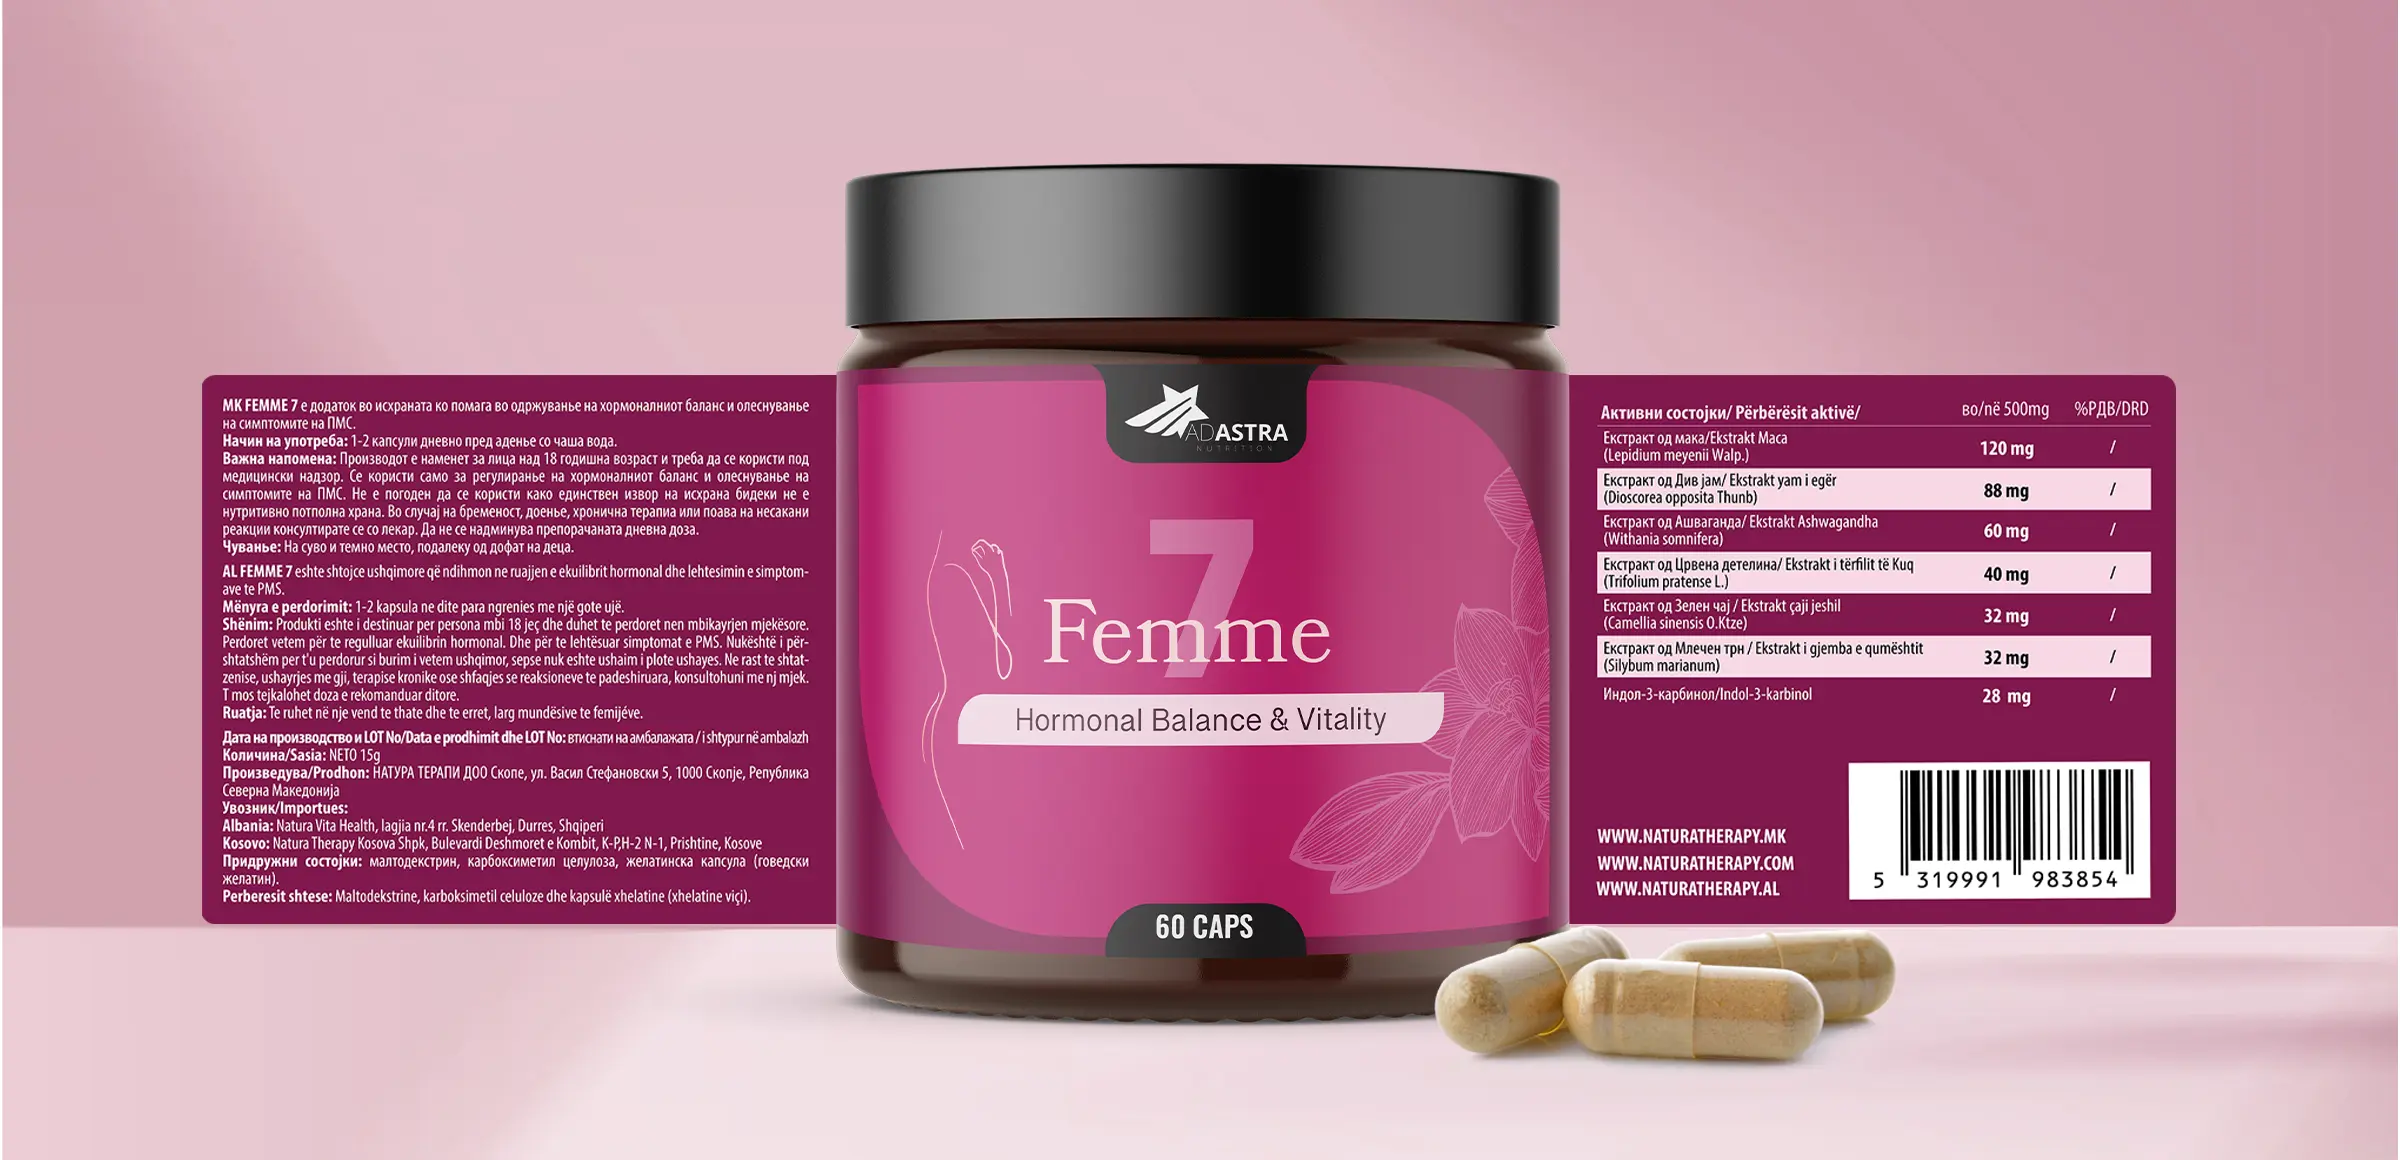 Packaging Label for Femme 7 in a jar, revealing the entire label